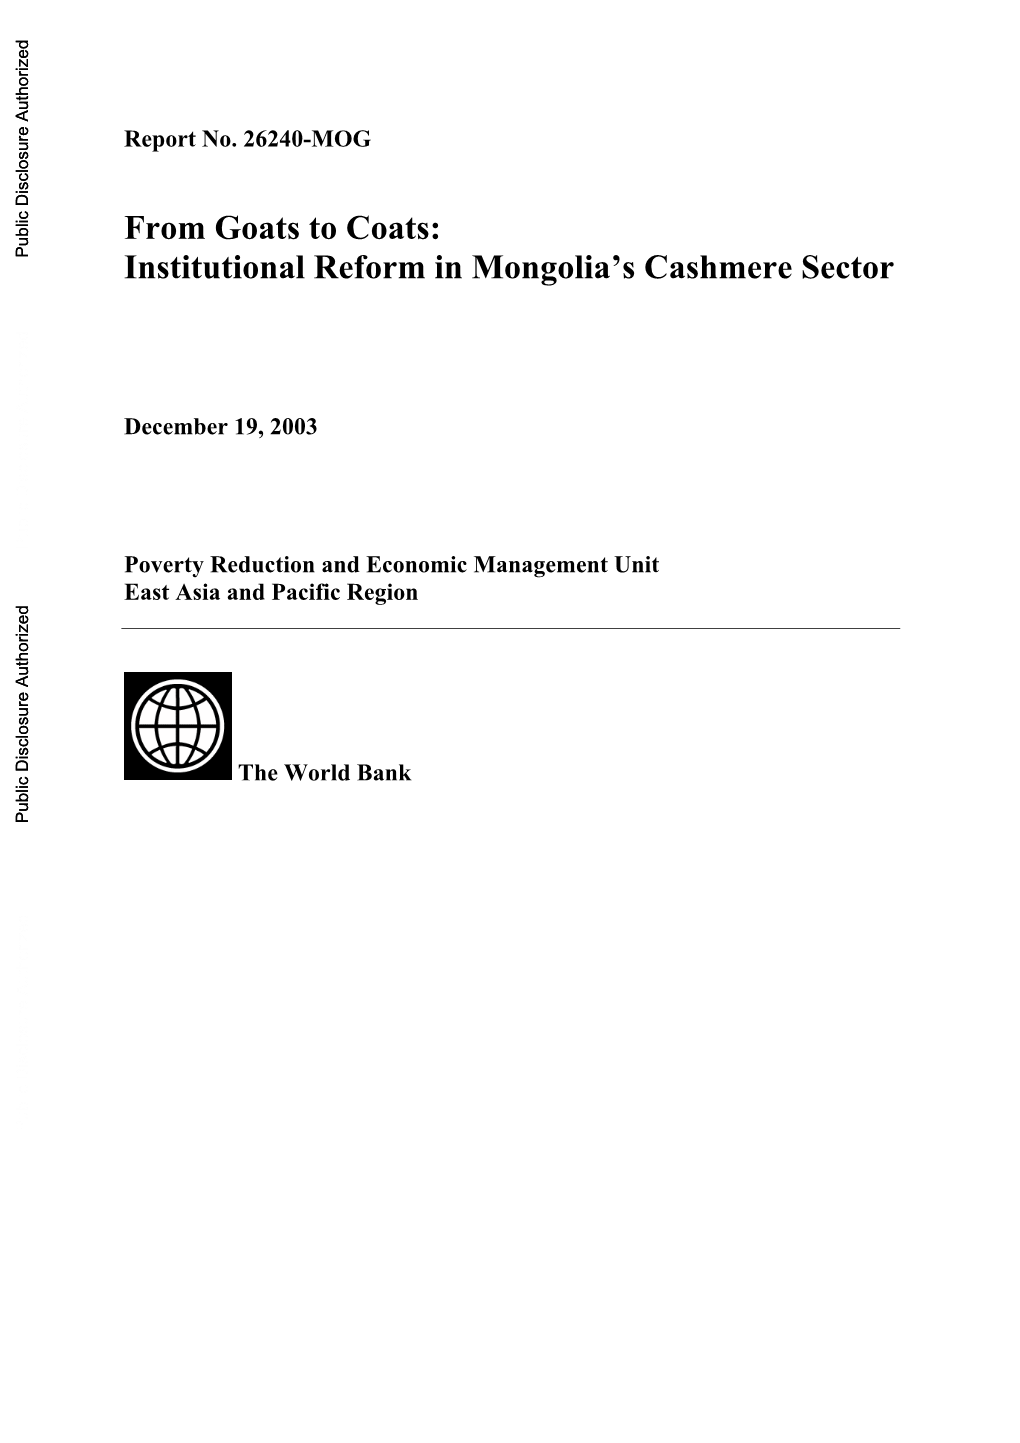 Institutional Reform in Mongolia's Cashmere Sector